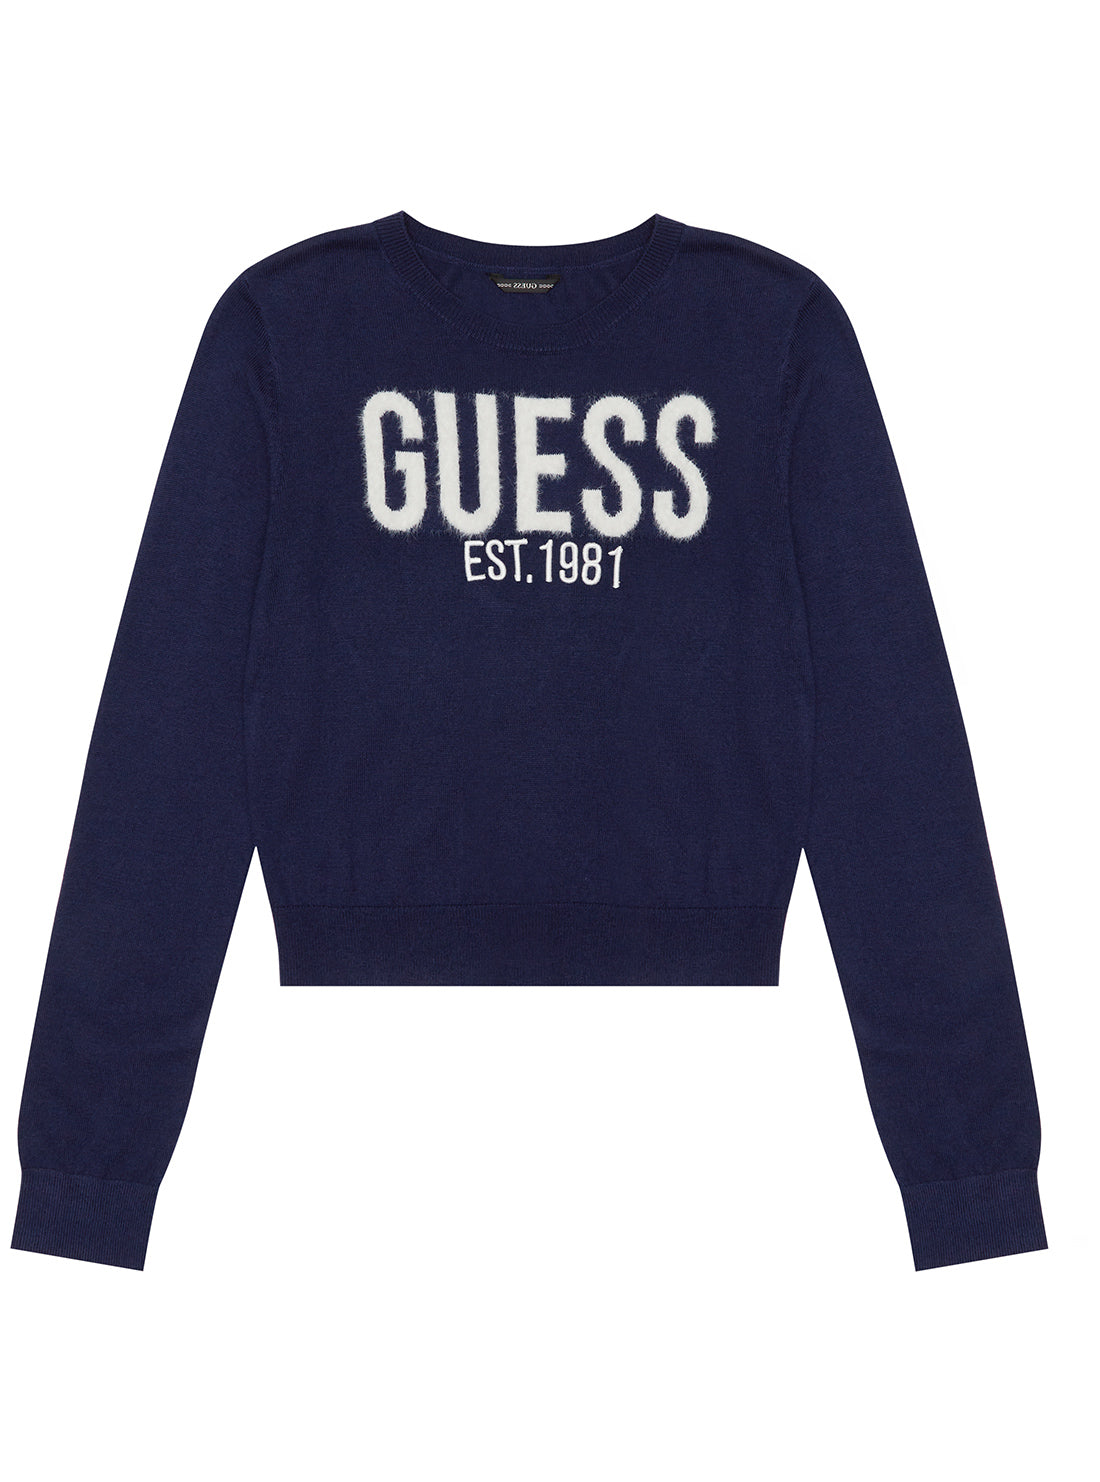 GUESS Black Long Sleeve Jumper (7-16) front view